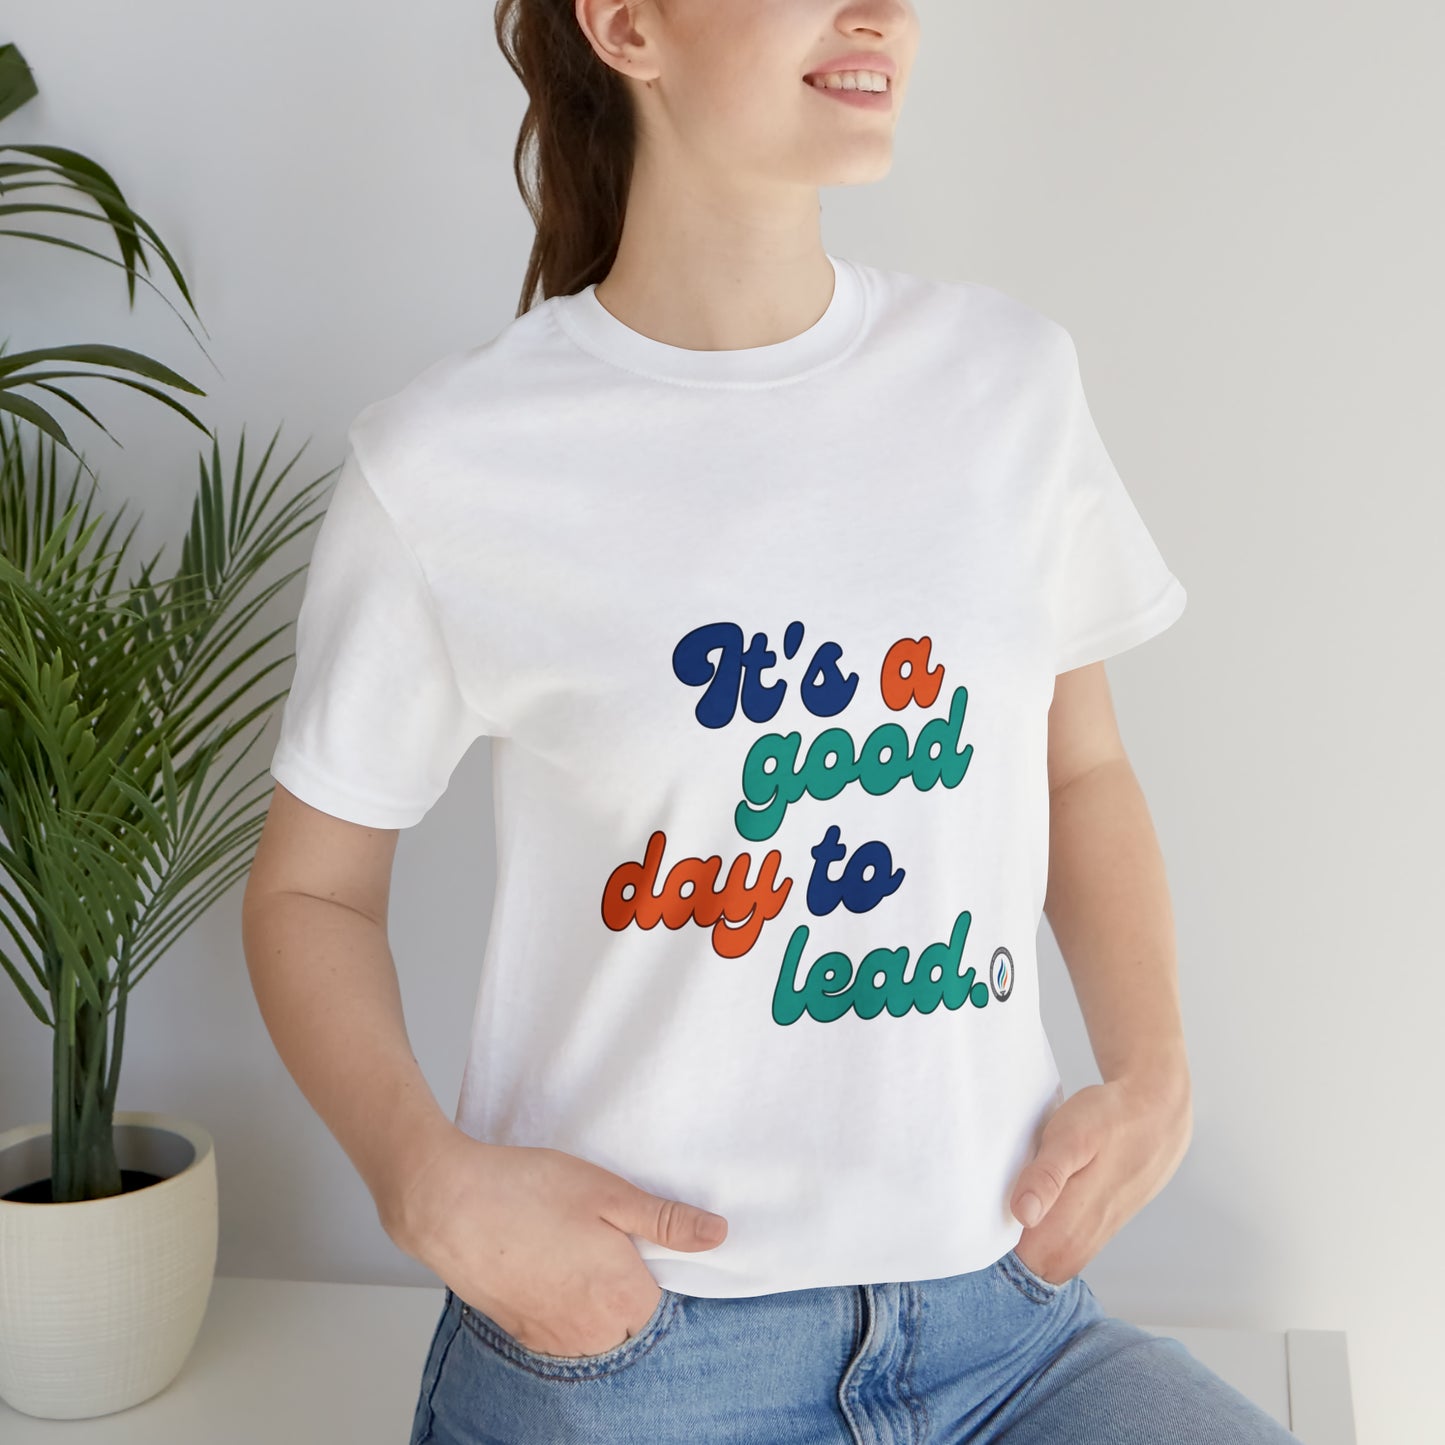 "It's a good day to lead" Unisex soft Jersey Short Sleeve Tee